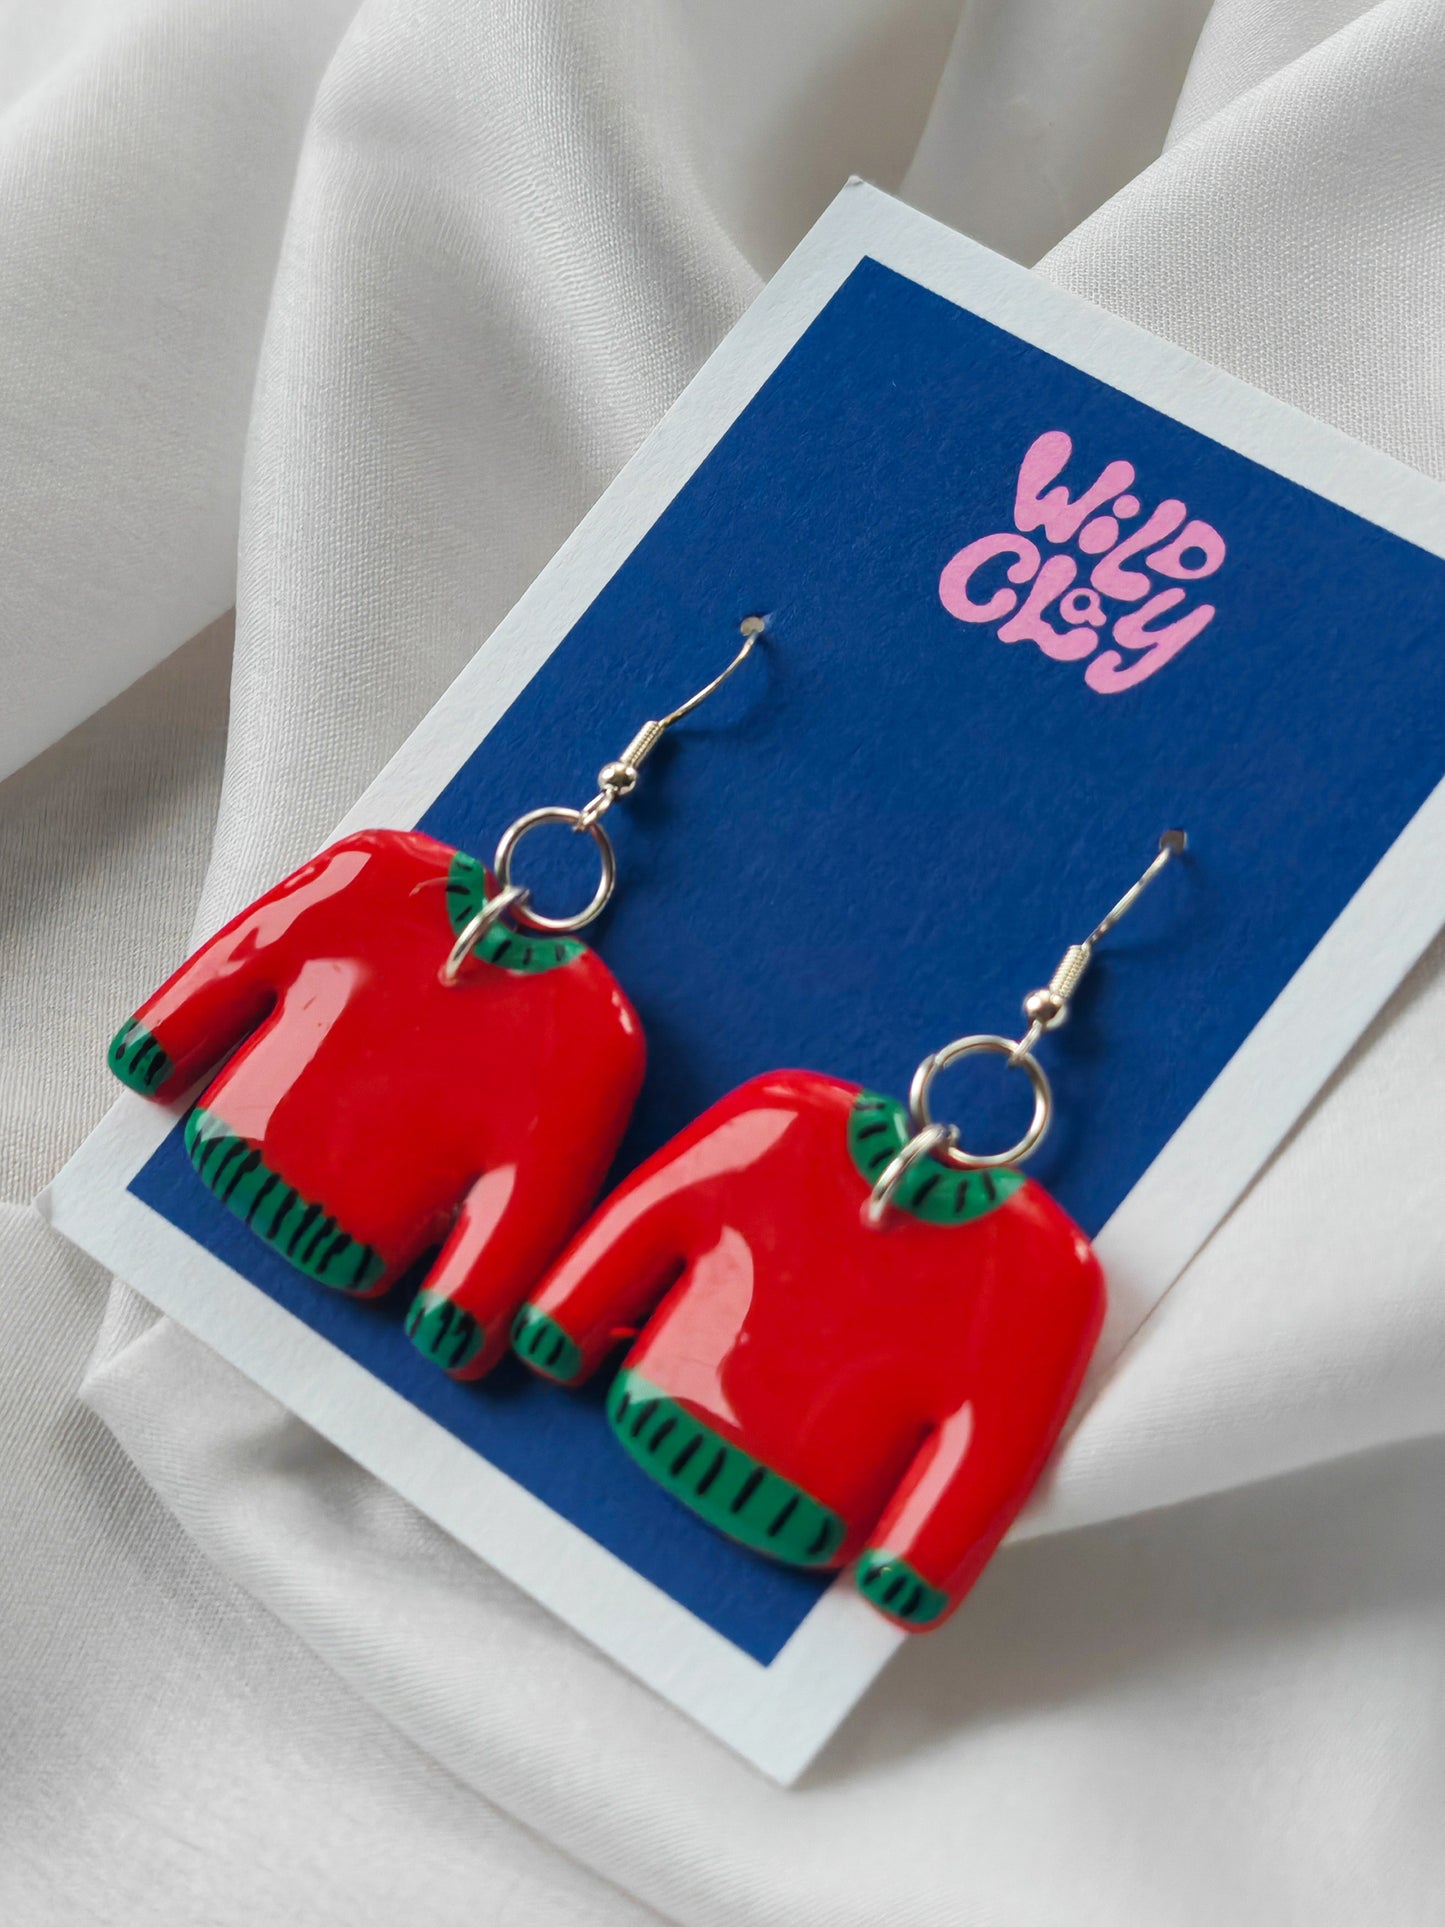 Green and Red Jumper Earrings